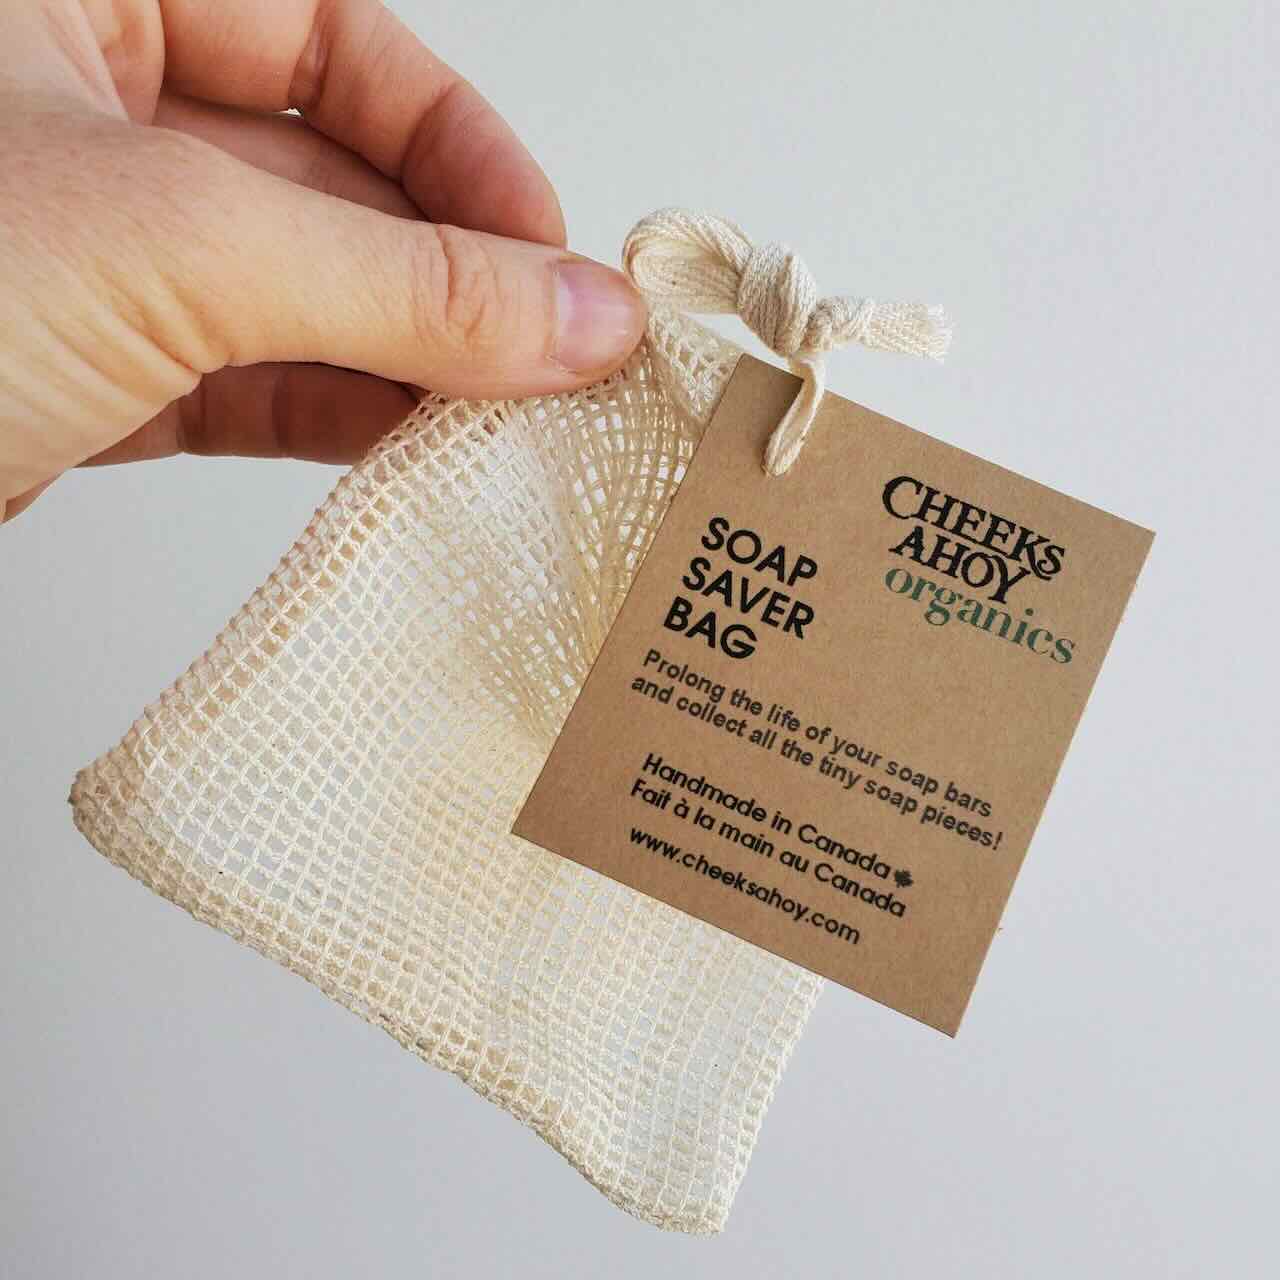 Cheeks Ahoy Soap Saver Bag being held up on a finger tip, with label clearly shown: hand made in Canada, Organic